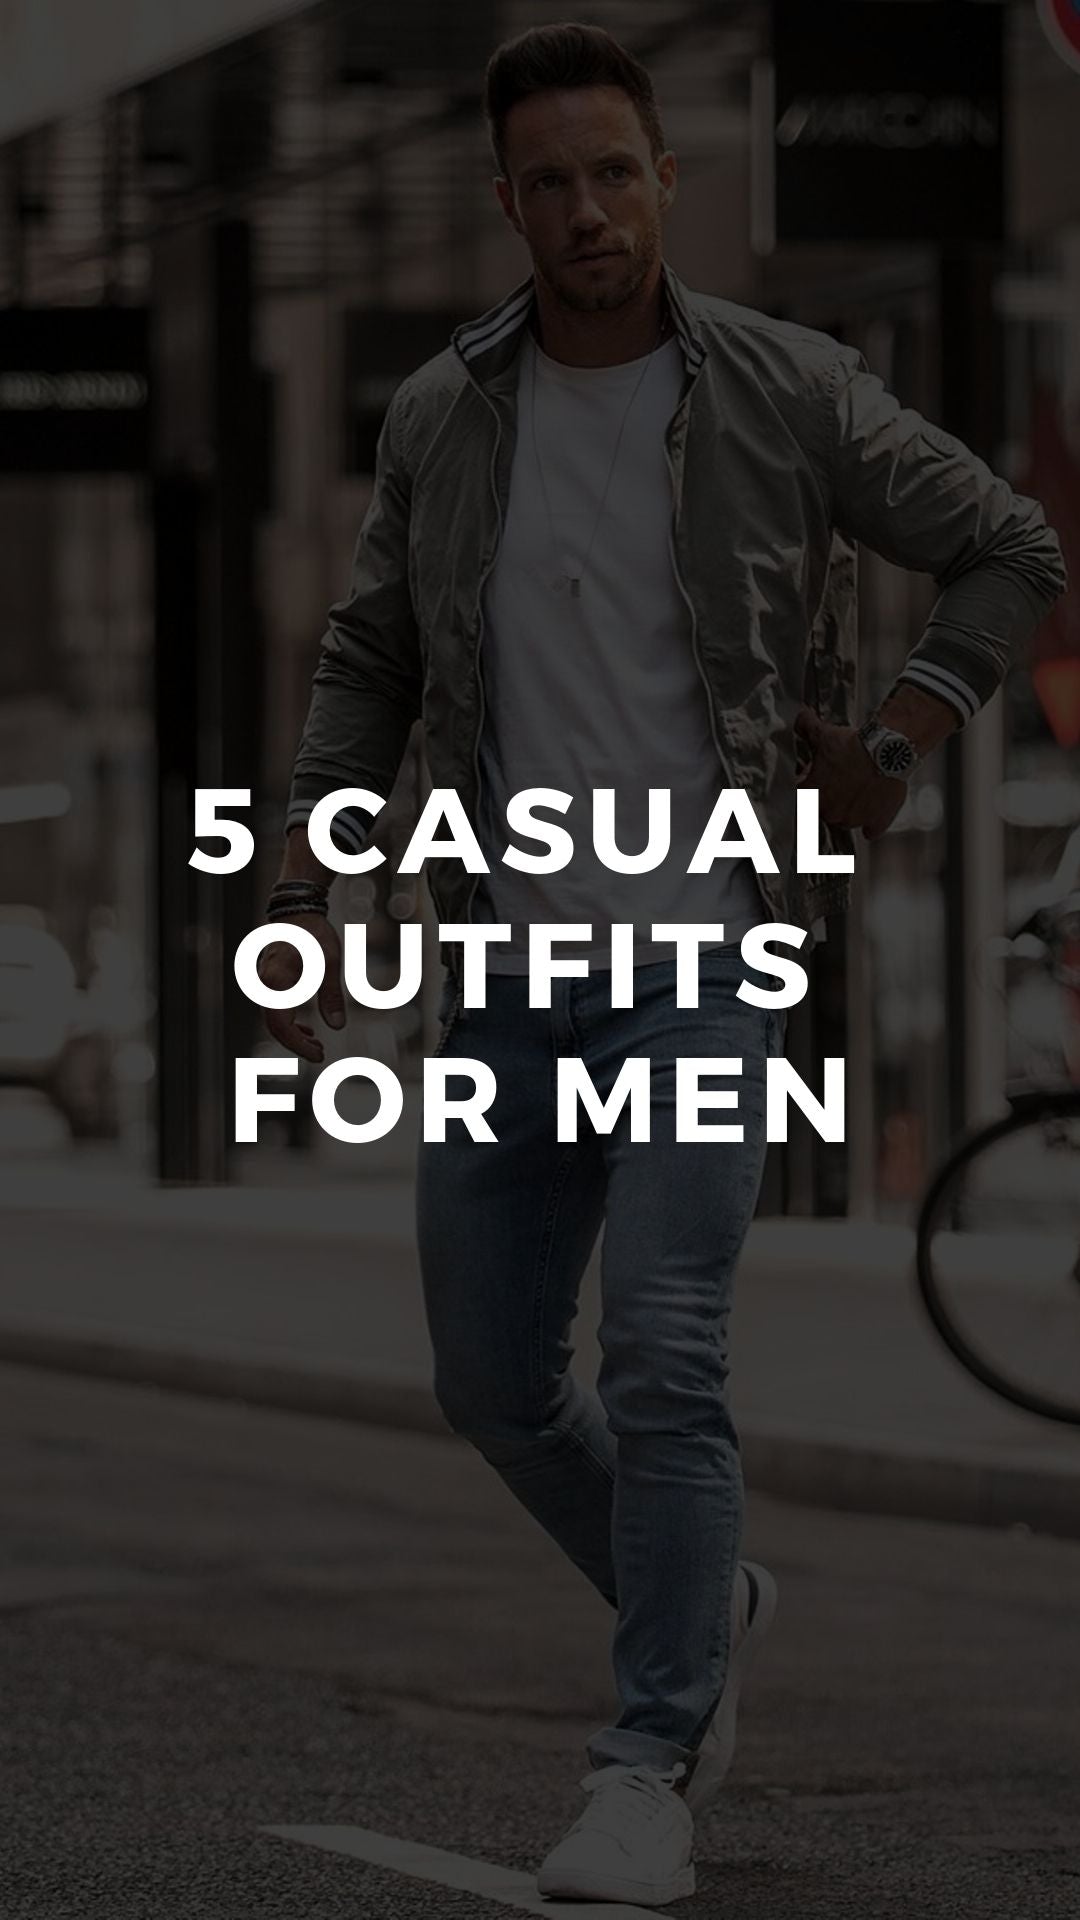 5 Casual outfits for men #mensfashion #casualoutfits #casual #style